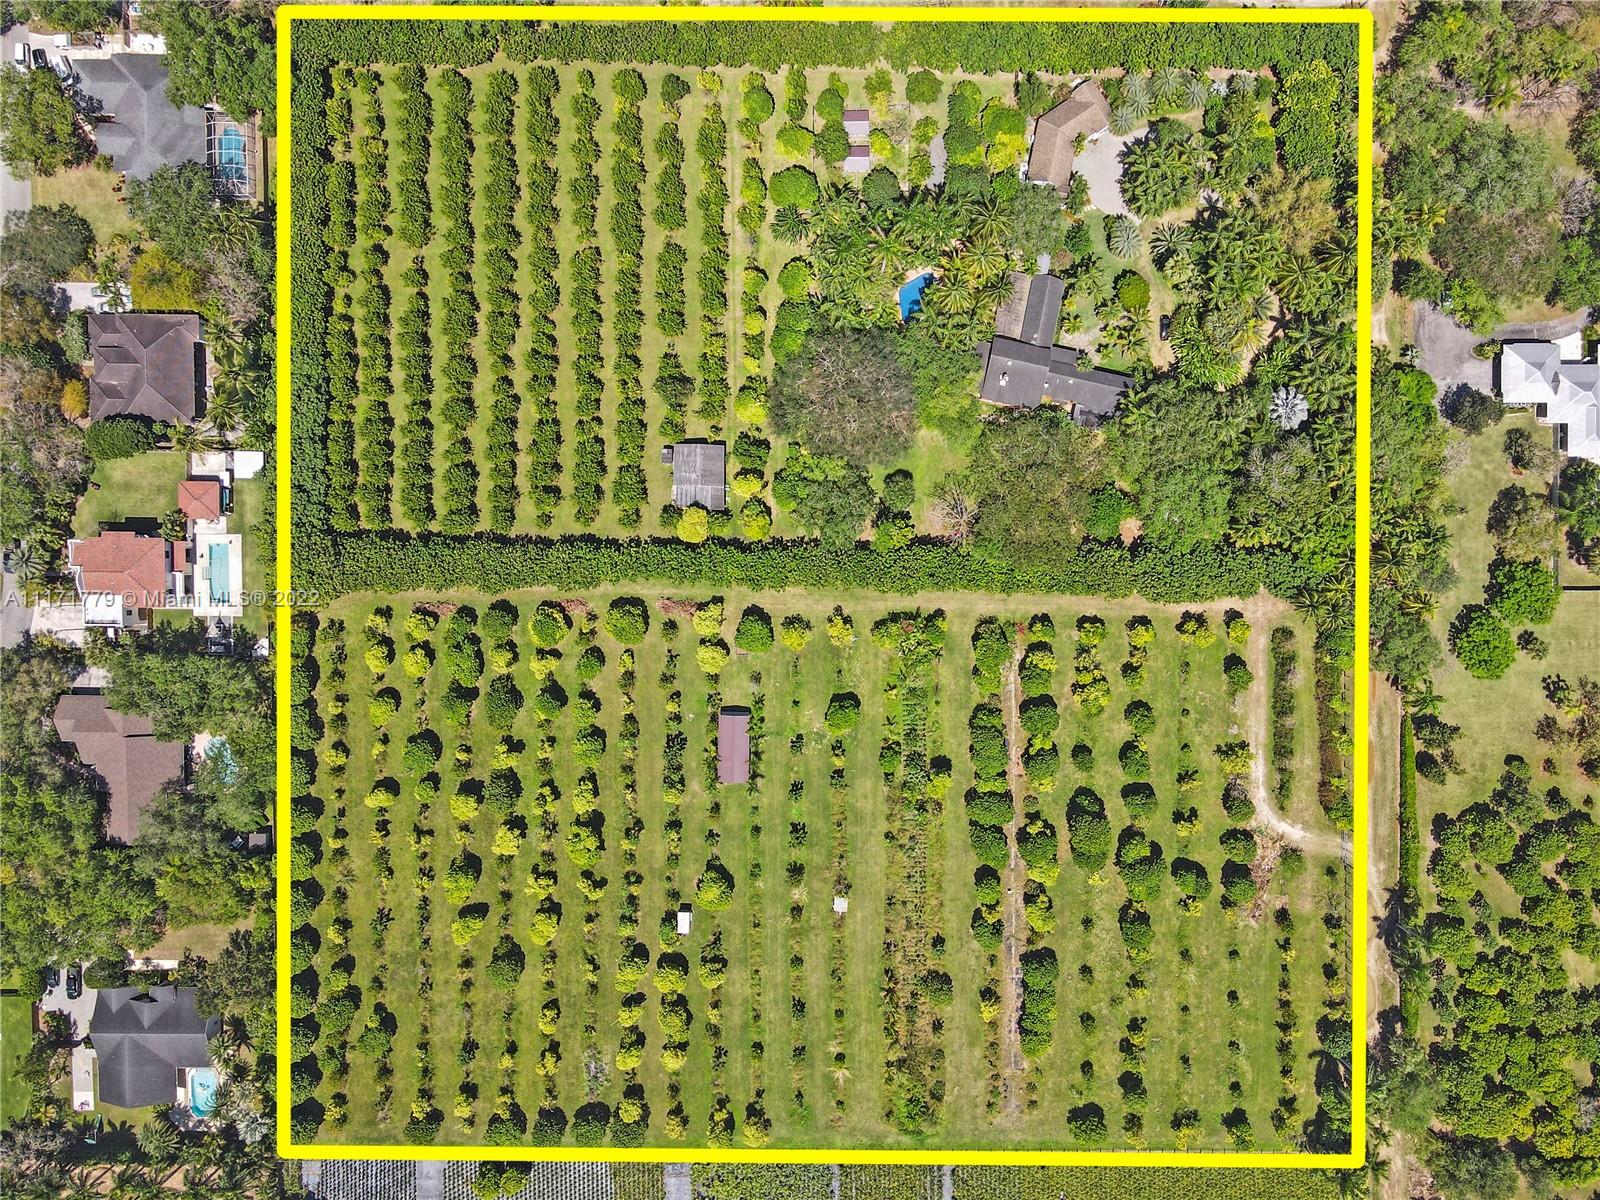 EXTREMLY PRIVATE W LUSH GROUNDS AND GROVES ON THIS FRENCH COUNTRY INSPIRED 10 ACRE COMPOUND. DESIGNED TO BRING THE INSIDE OUT AND ALLOW THE OUTSIDE IN.(SEE AND ENLARGE PHOTOS). LOCATED IN REDLAND W/AVAILIBILTY TO DEVELOP THE 3 FOLIOS. THE HOME SITS ON 5 ACRES  APPROVED TO DIVIDE INTO TWO 2.5 ACRE SITES & THE ADJACENT PARCELS ALLOW 4 BUILDABLE SITES OR LEAVE AS IS. ALL VERY ORGANIC W/GROVES LYCHEES (SWEETHEART+) CARAMBOLA,LONGAN  & ASST TROPICAL FRUIT.  A 4/ 2.5 BATH OPEN & SPLIT PLAN POOL WITH DBL SIDE OOLITE FIREPLACE DEFINES THE SPACE. A 4 CAR A/C GARAGE IS ATTACHED BY A COVERED BREEZEWAY. MULTIPLE LANAIS OVERLOOK THIS TROPICAL OASIS. HIGH AND DRY ON THE EDGE OF A HAMMOCK. IF YOU ARE LOOKING FOR PRIVACY, THE AVAILABILITY TO CONTROL THE SPACE AROUND YOU.THIS IS IT..